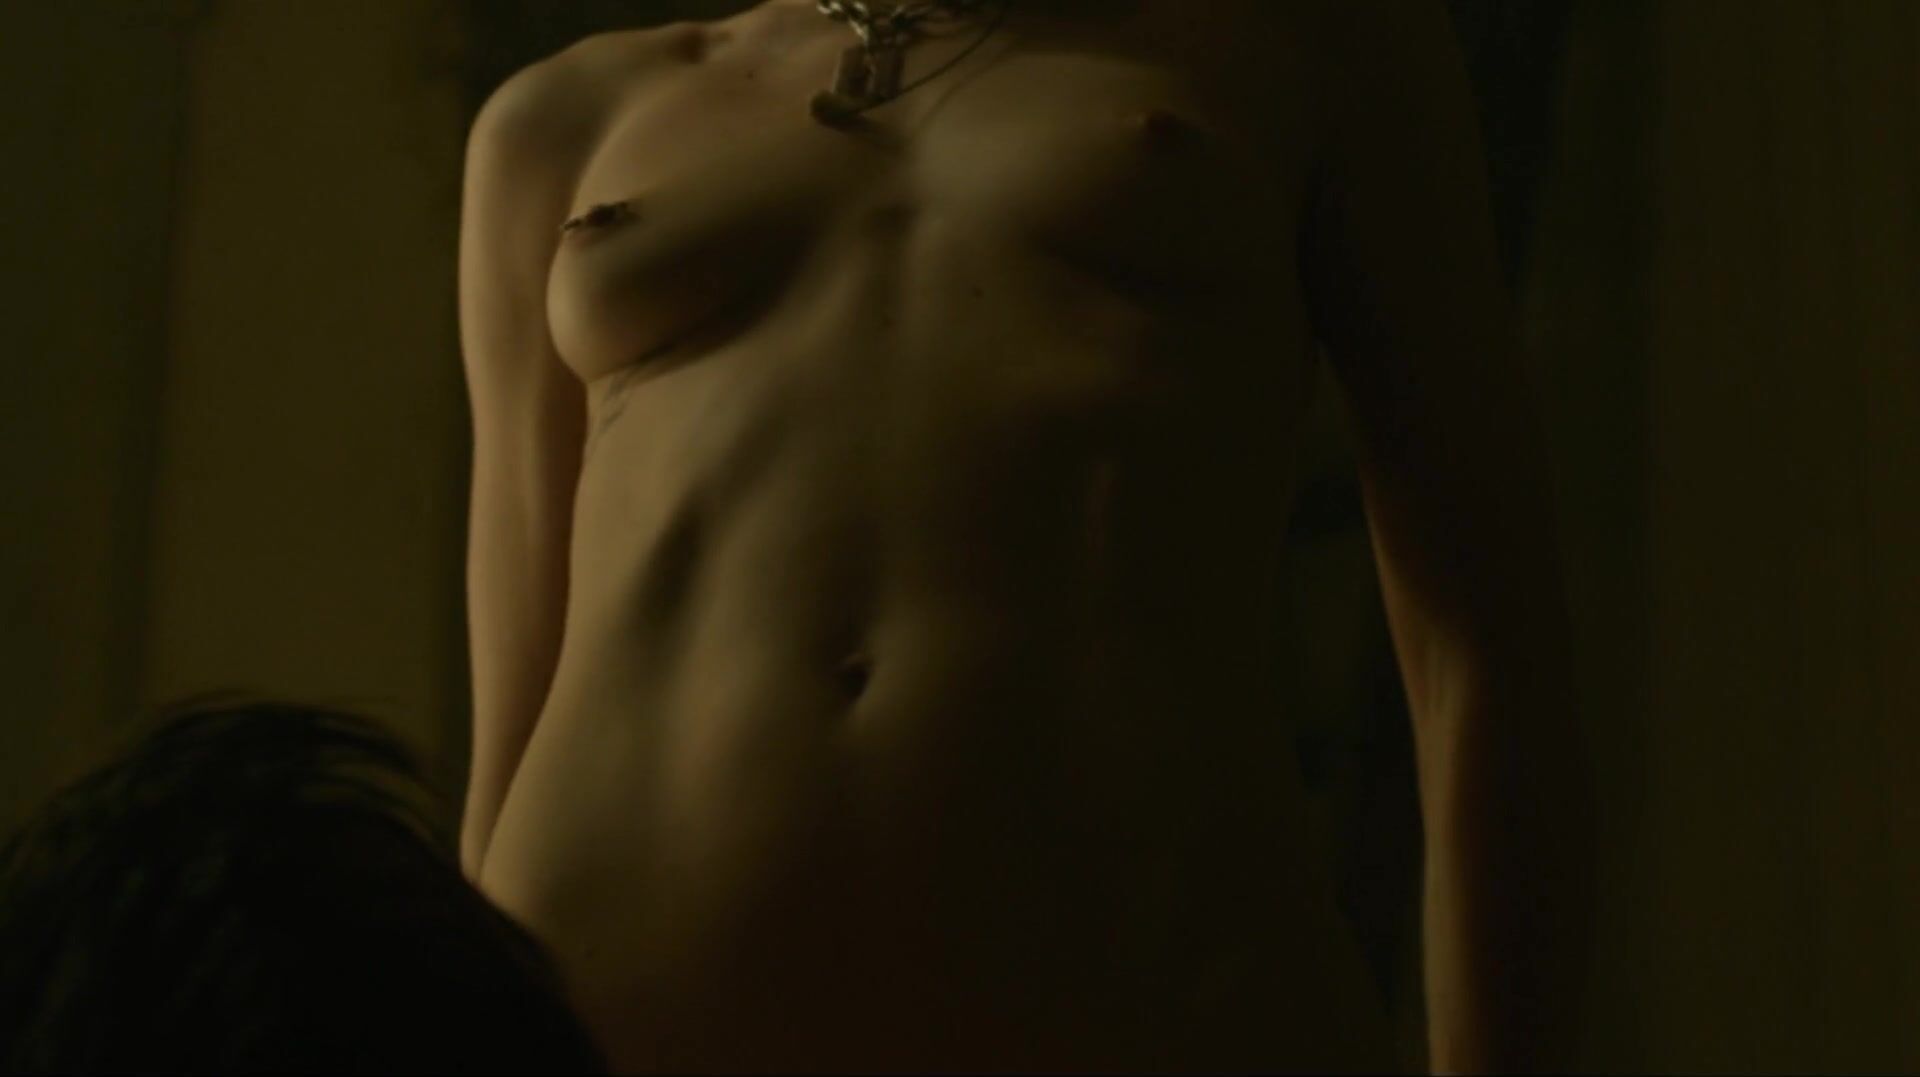 SoloPornoItaliani Men hump Rooney Mara with her consent or without it in Girl With The Dragon Tattoo Blondes - 2